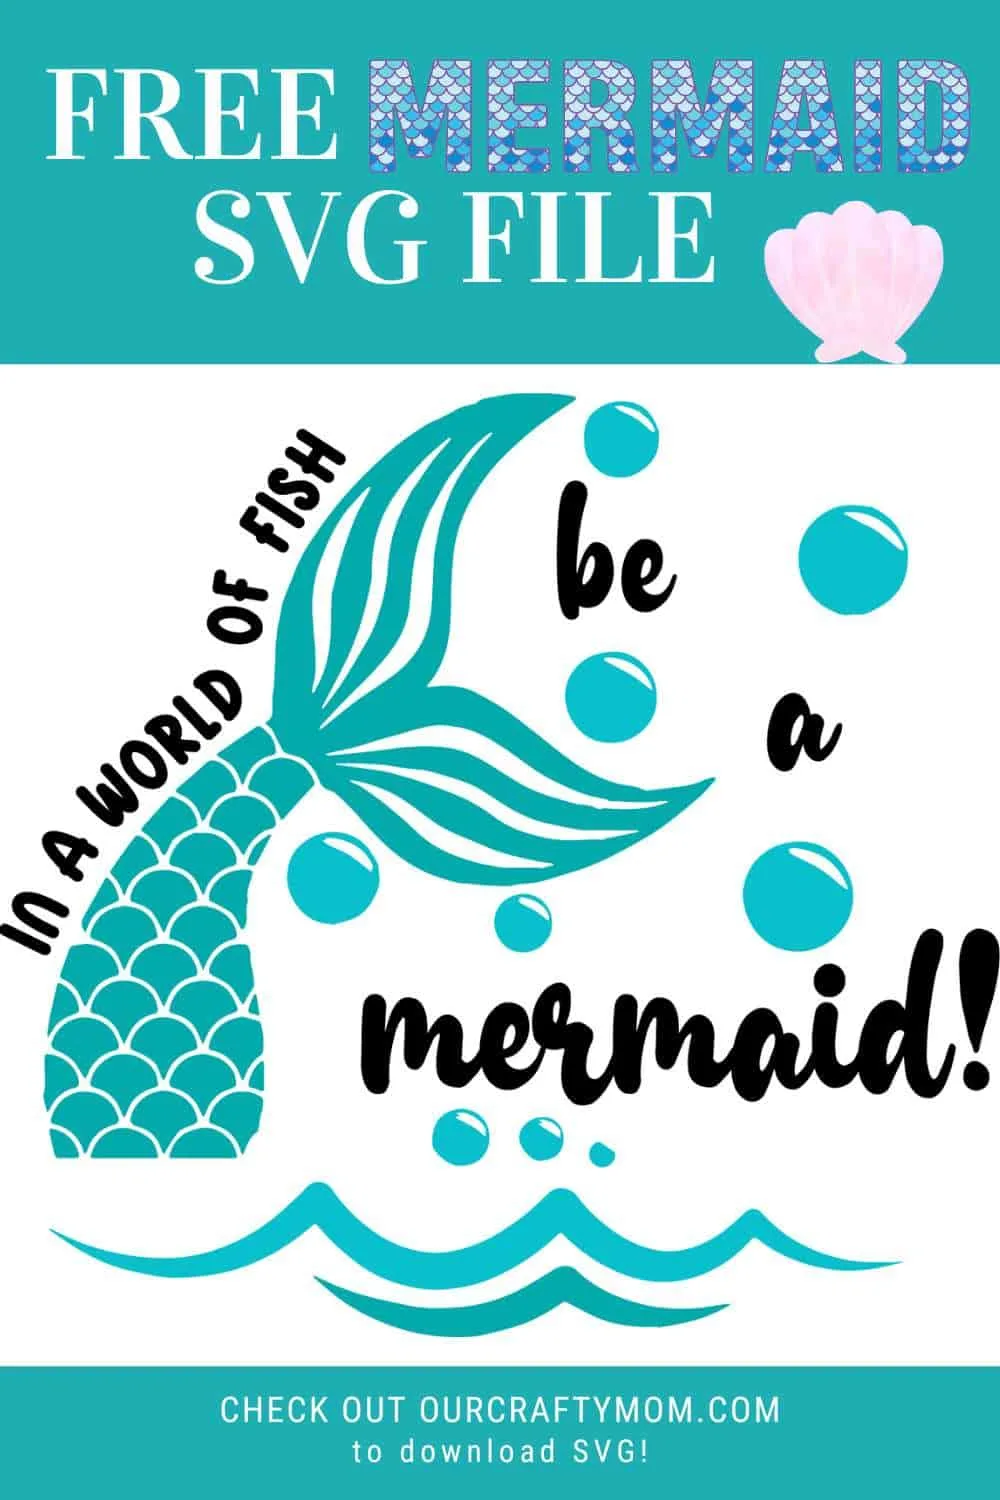 mermaid pin with text overlay